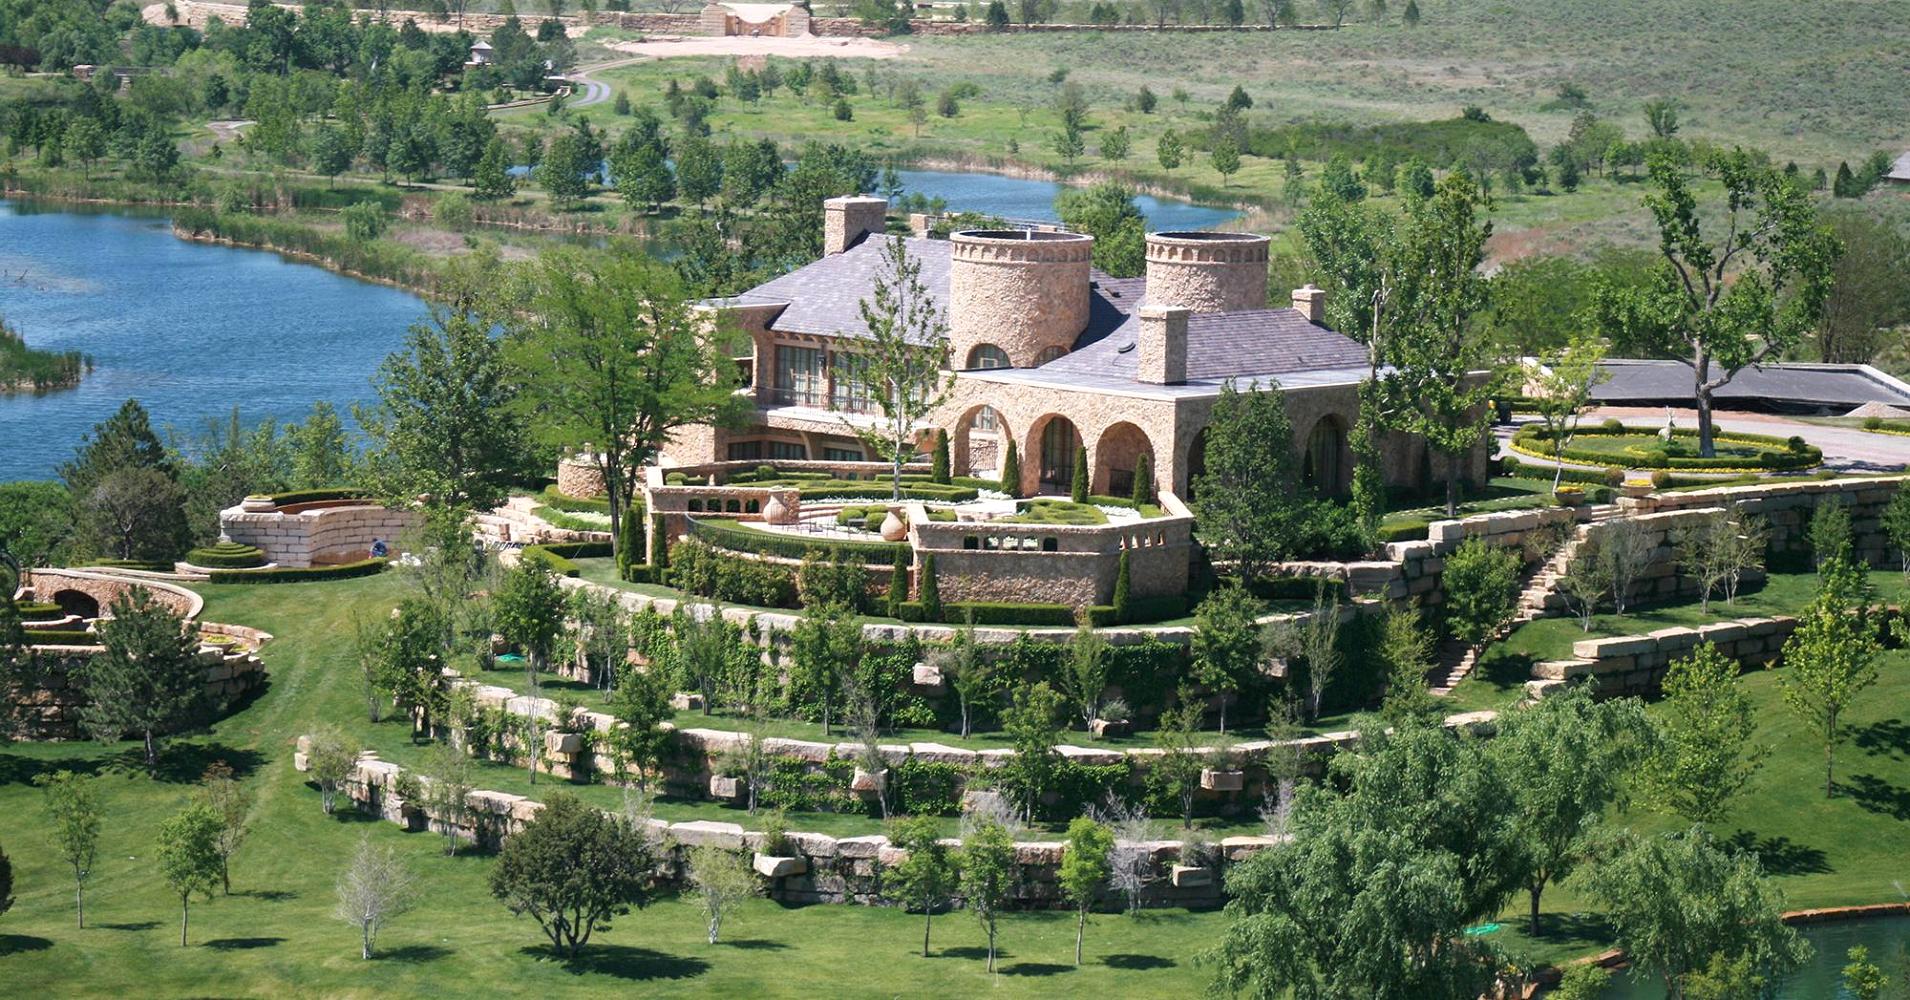 For sale: Boone Pickens' $250 million ranch. Take a look inside.